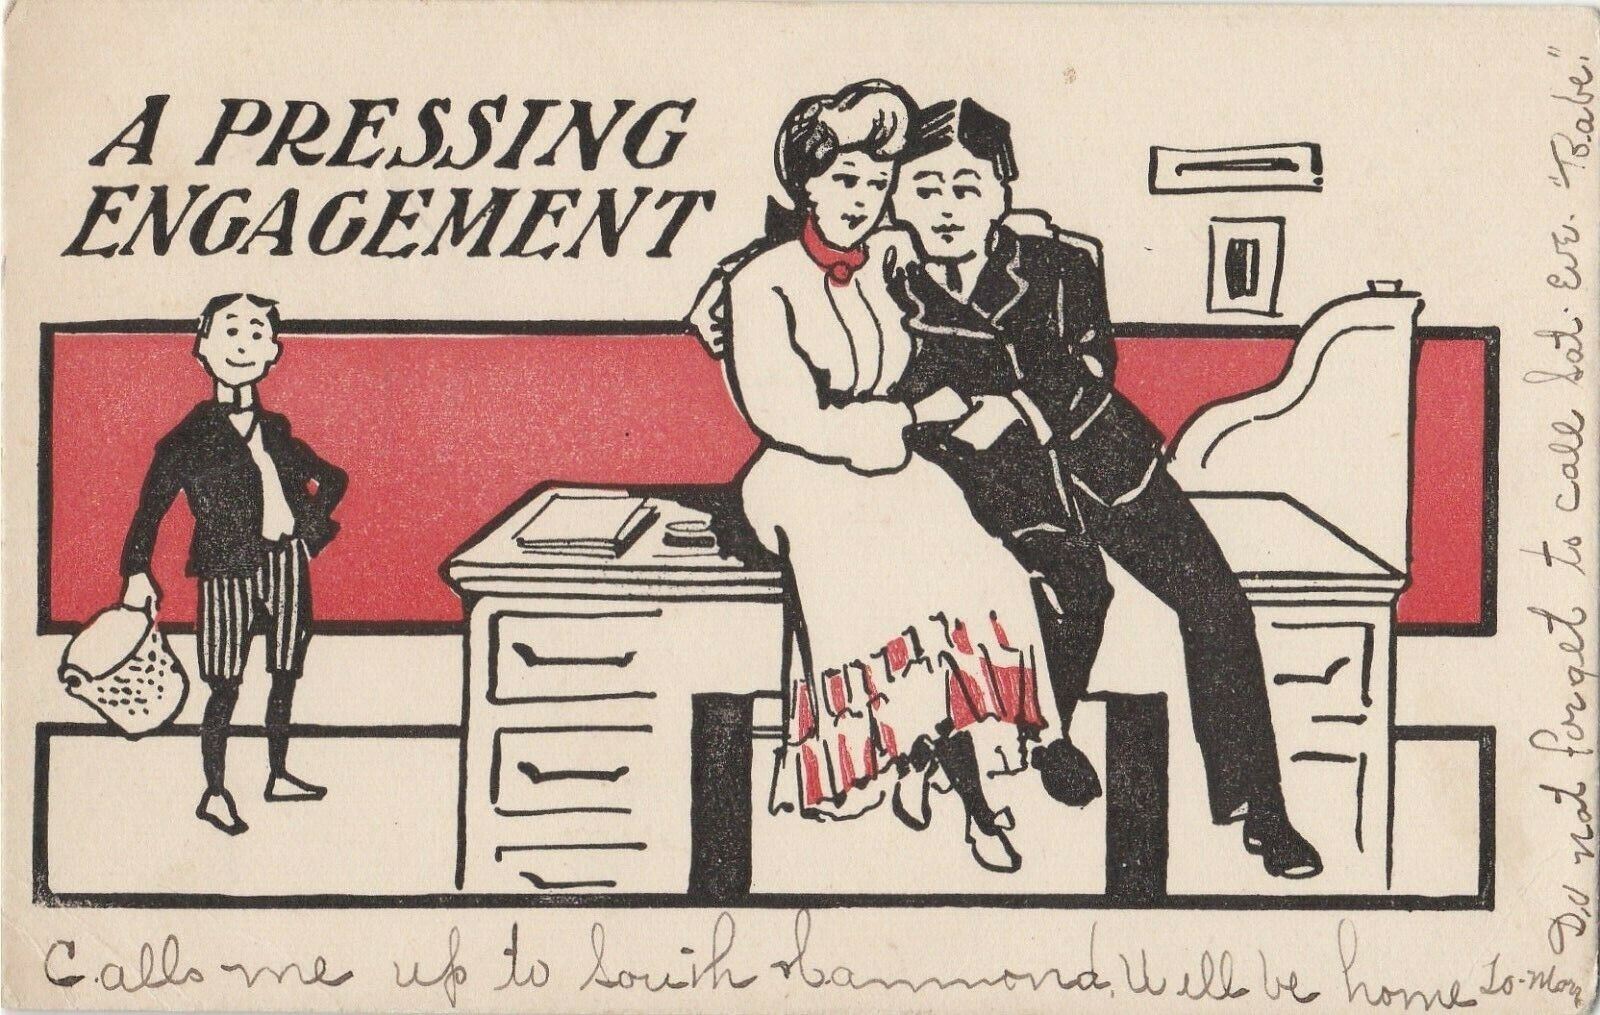 Postcard A Pressing Engagement Work Couple Comic Undivided Posted South Hampton 